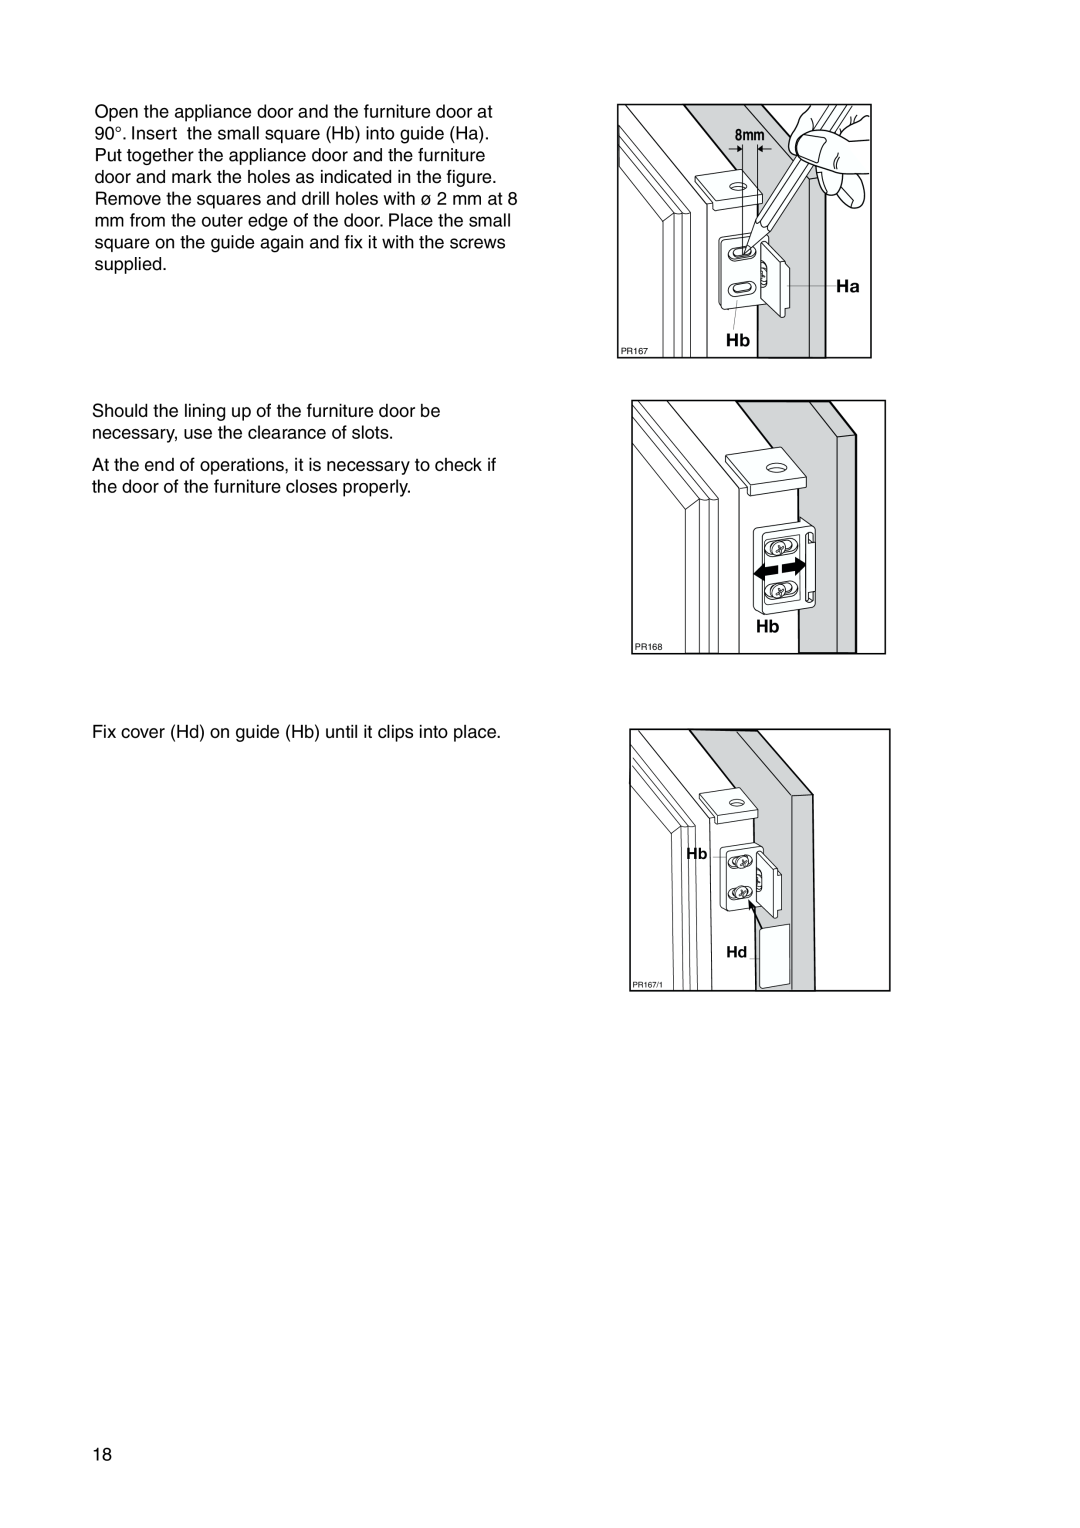 Electrolux EUF 23800 user manual Fix cover Hd on guide Hb until it clips into place 